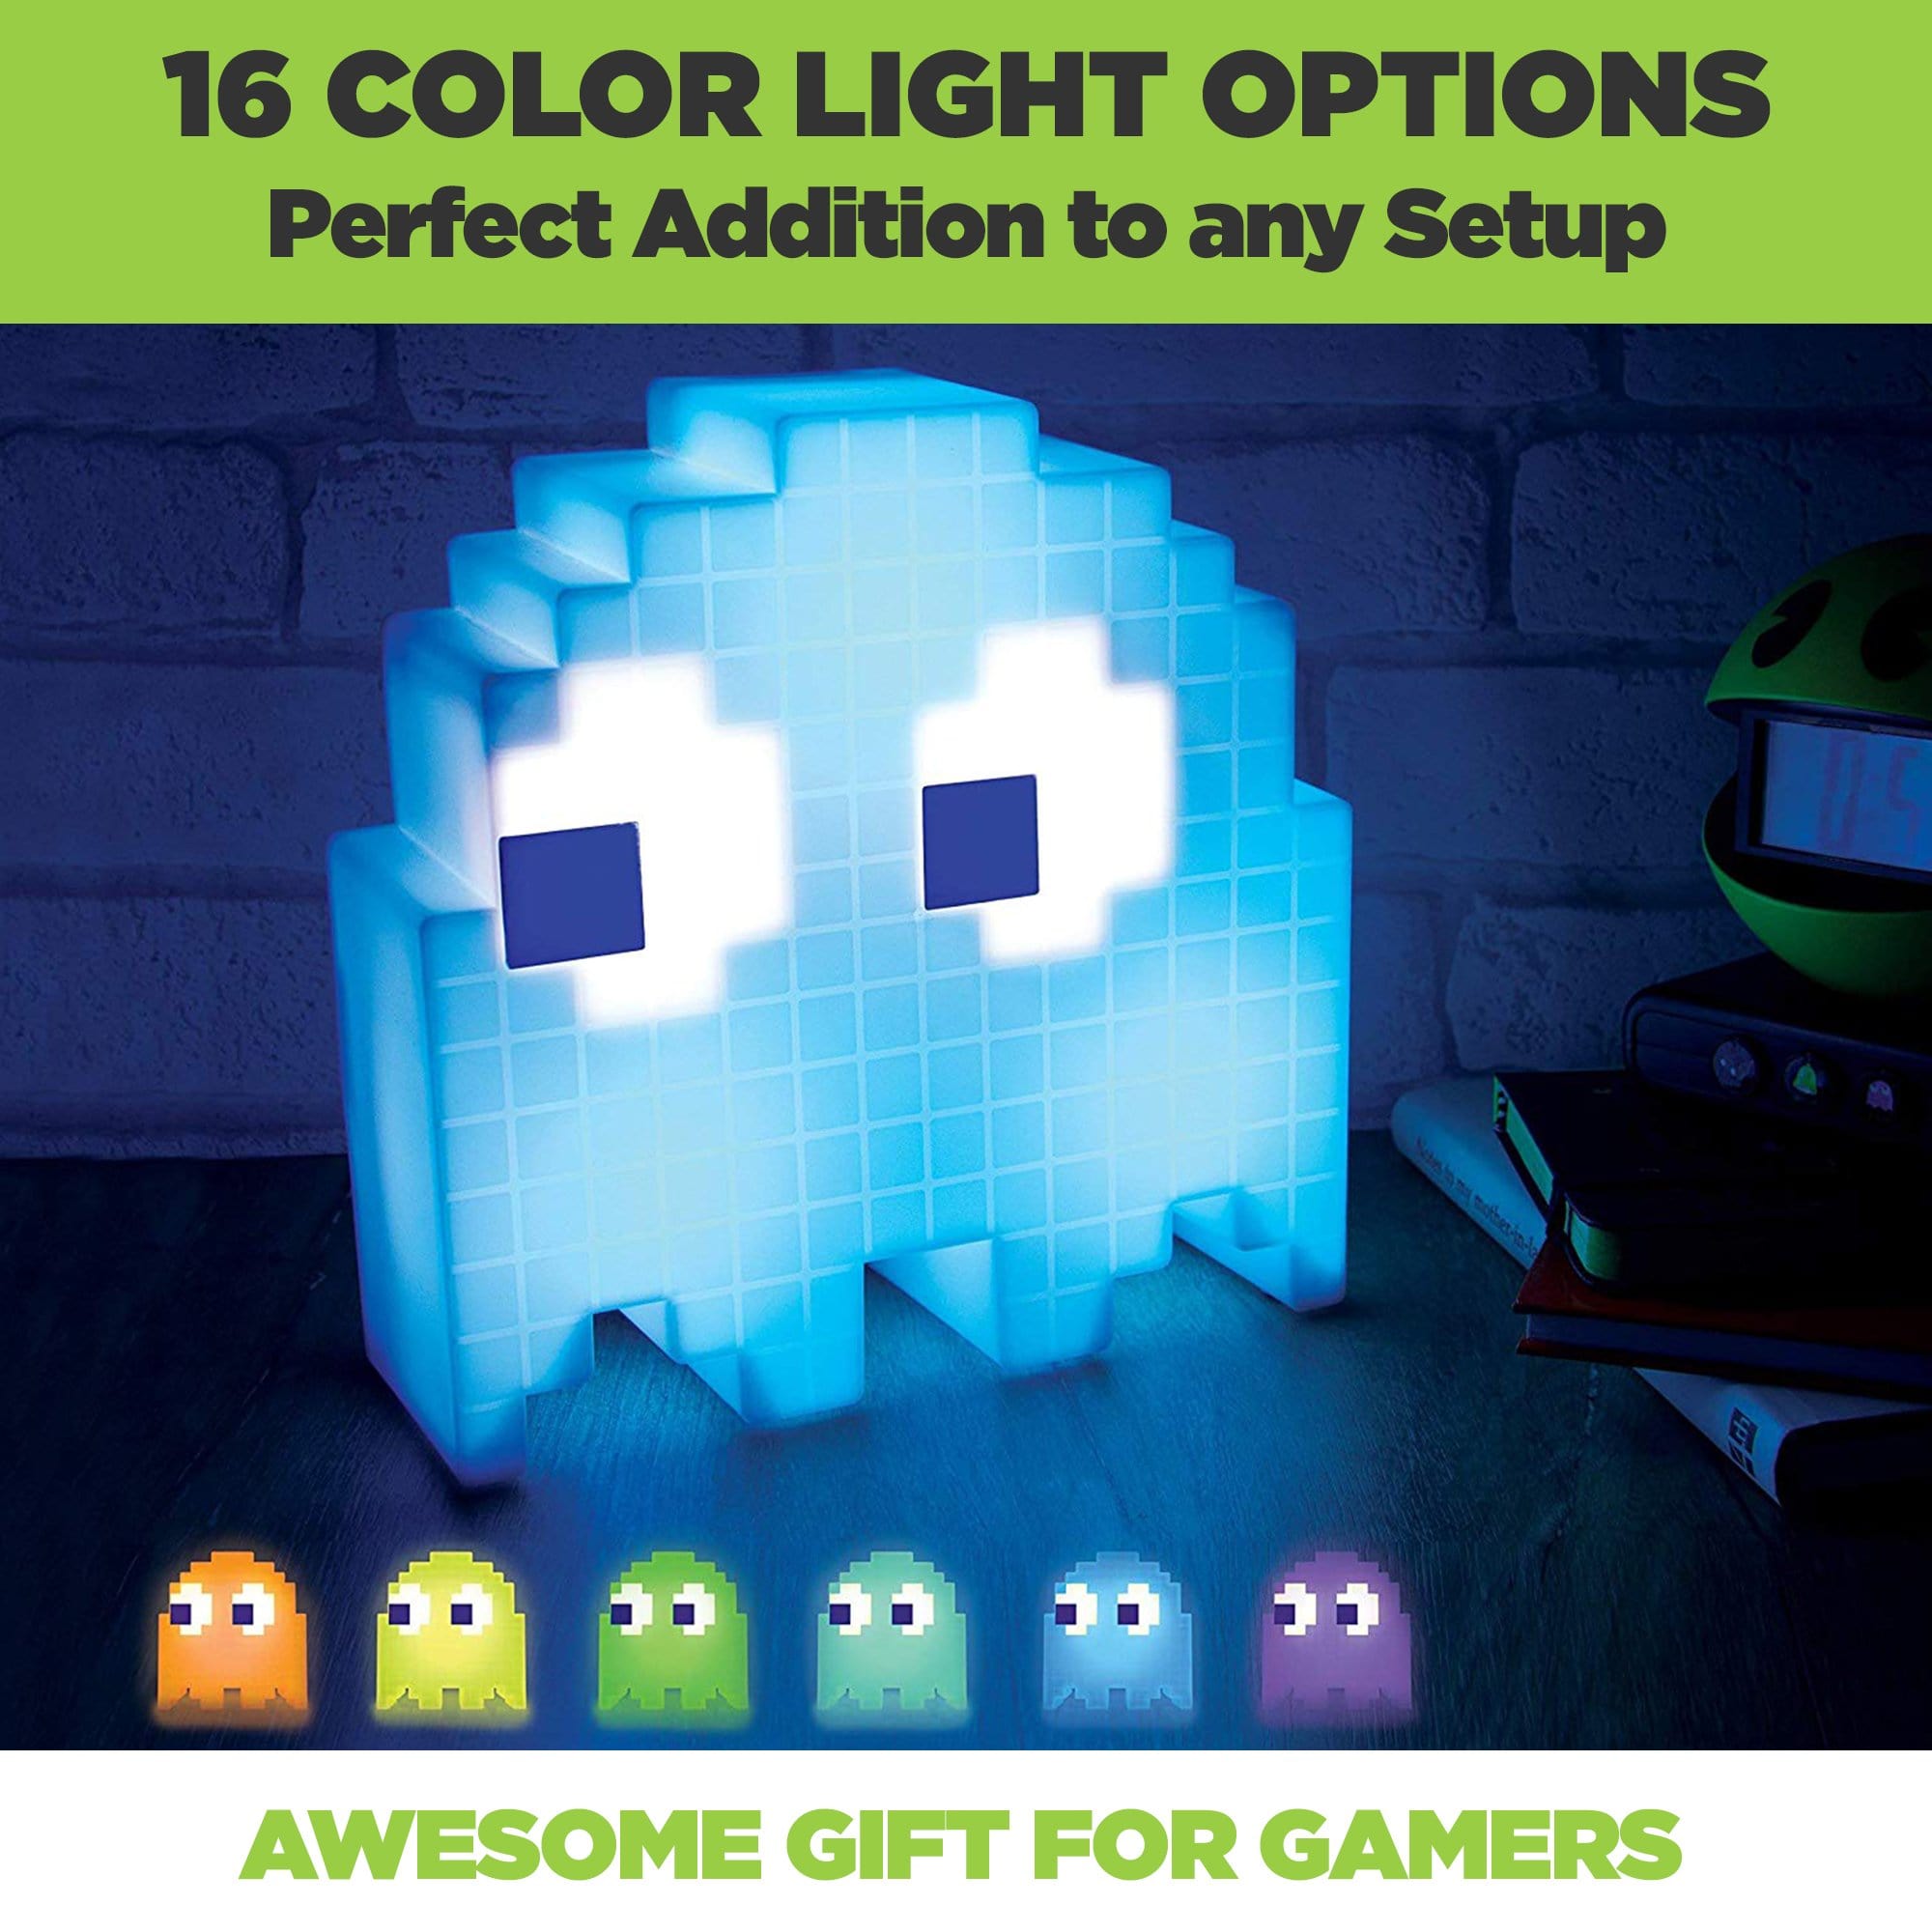 Pac-man color changing ghost lamp, made by Paladone sold by HIDEit Mounts. 16 color light options.